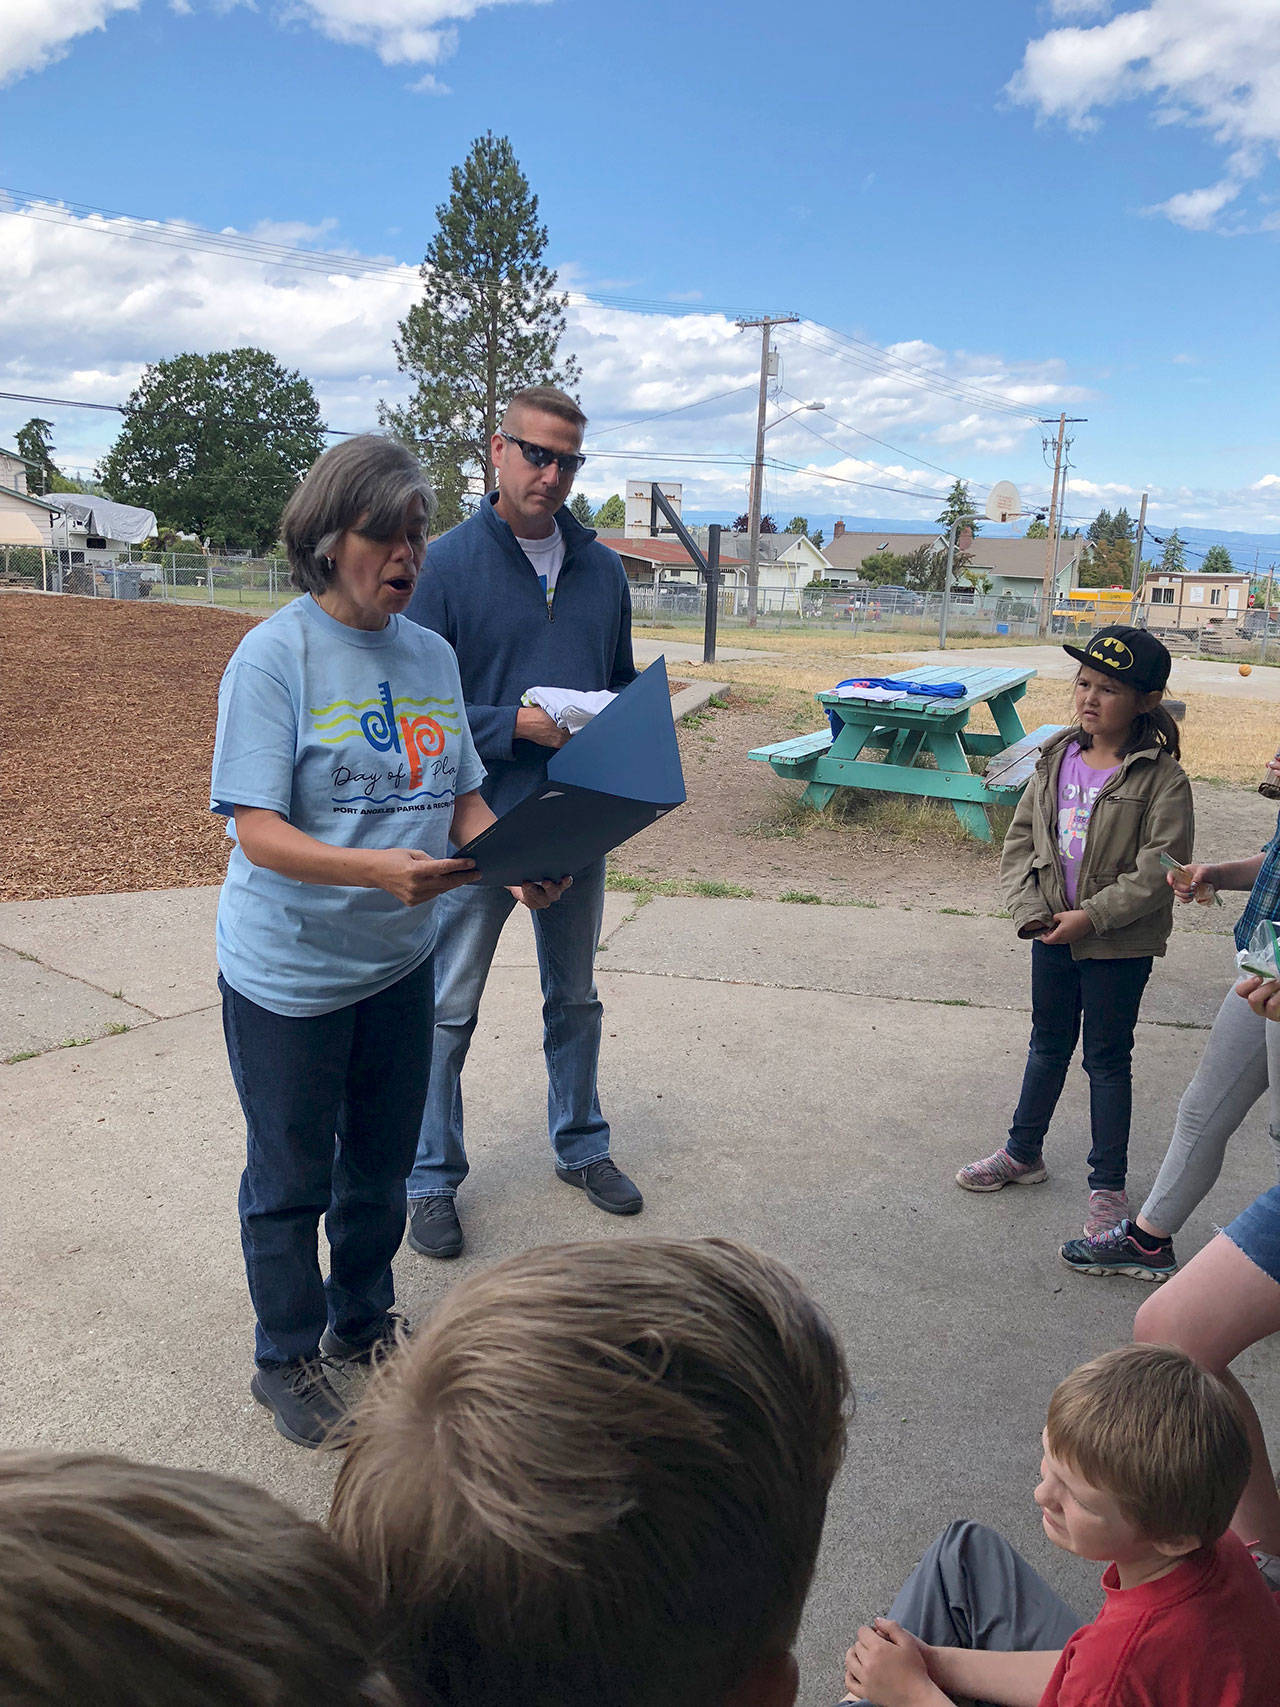 Port Angeles Mayor Sissi Bruch and Parks and Recreation Director Corey Delikat kicked off Day of Play last Friday by reading a proclamation at the Boys & Girls Club in Port Angeles.